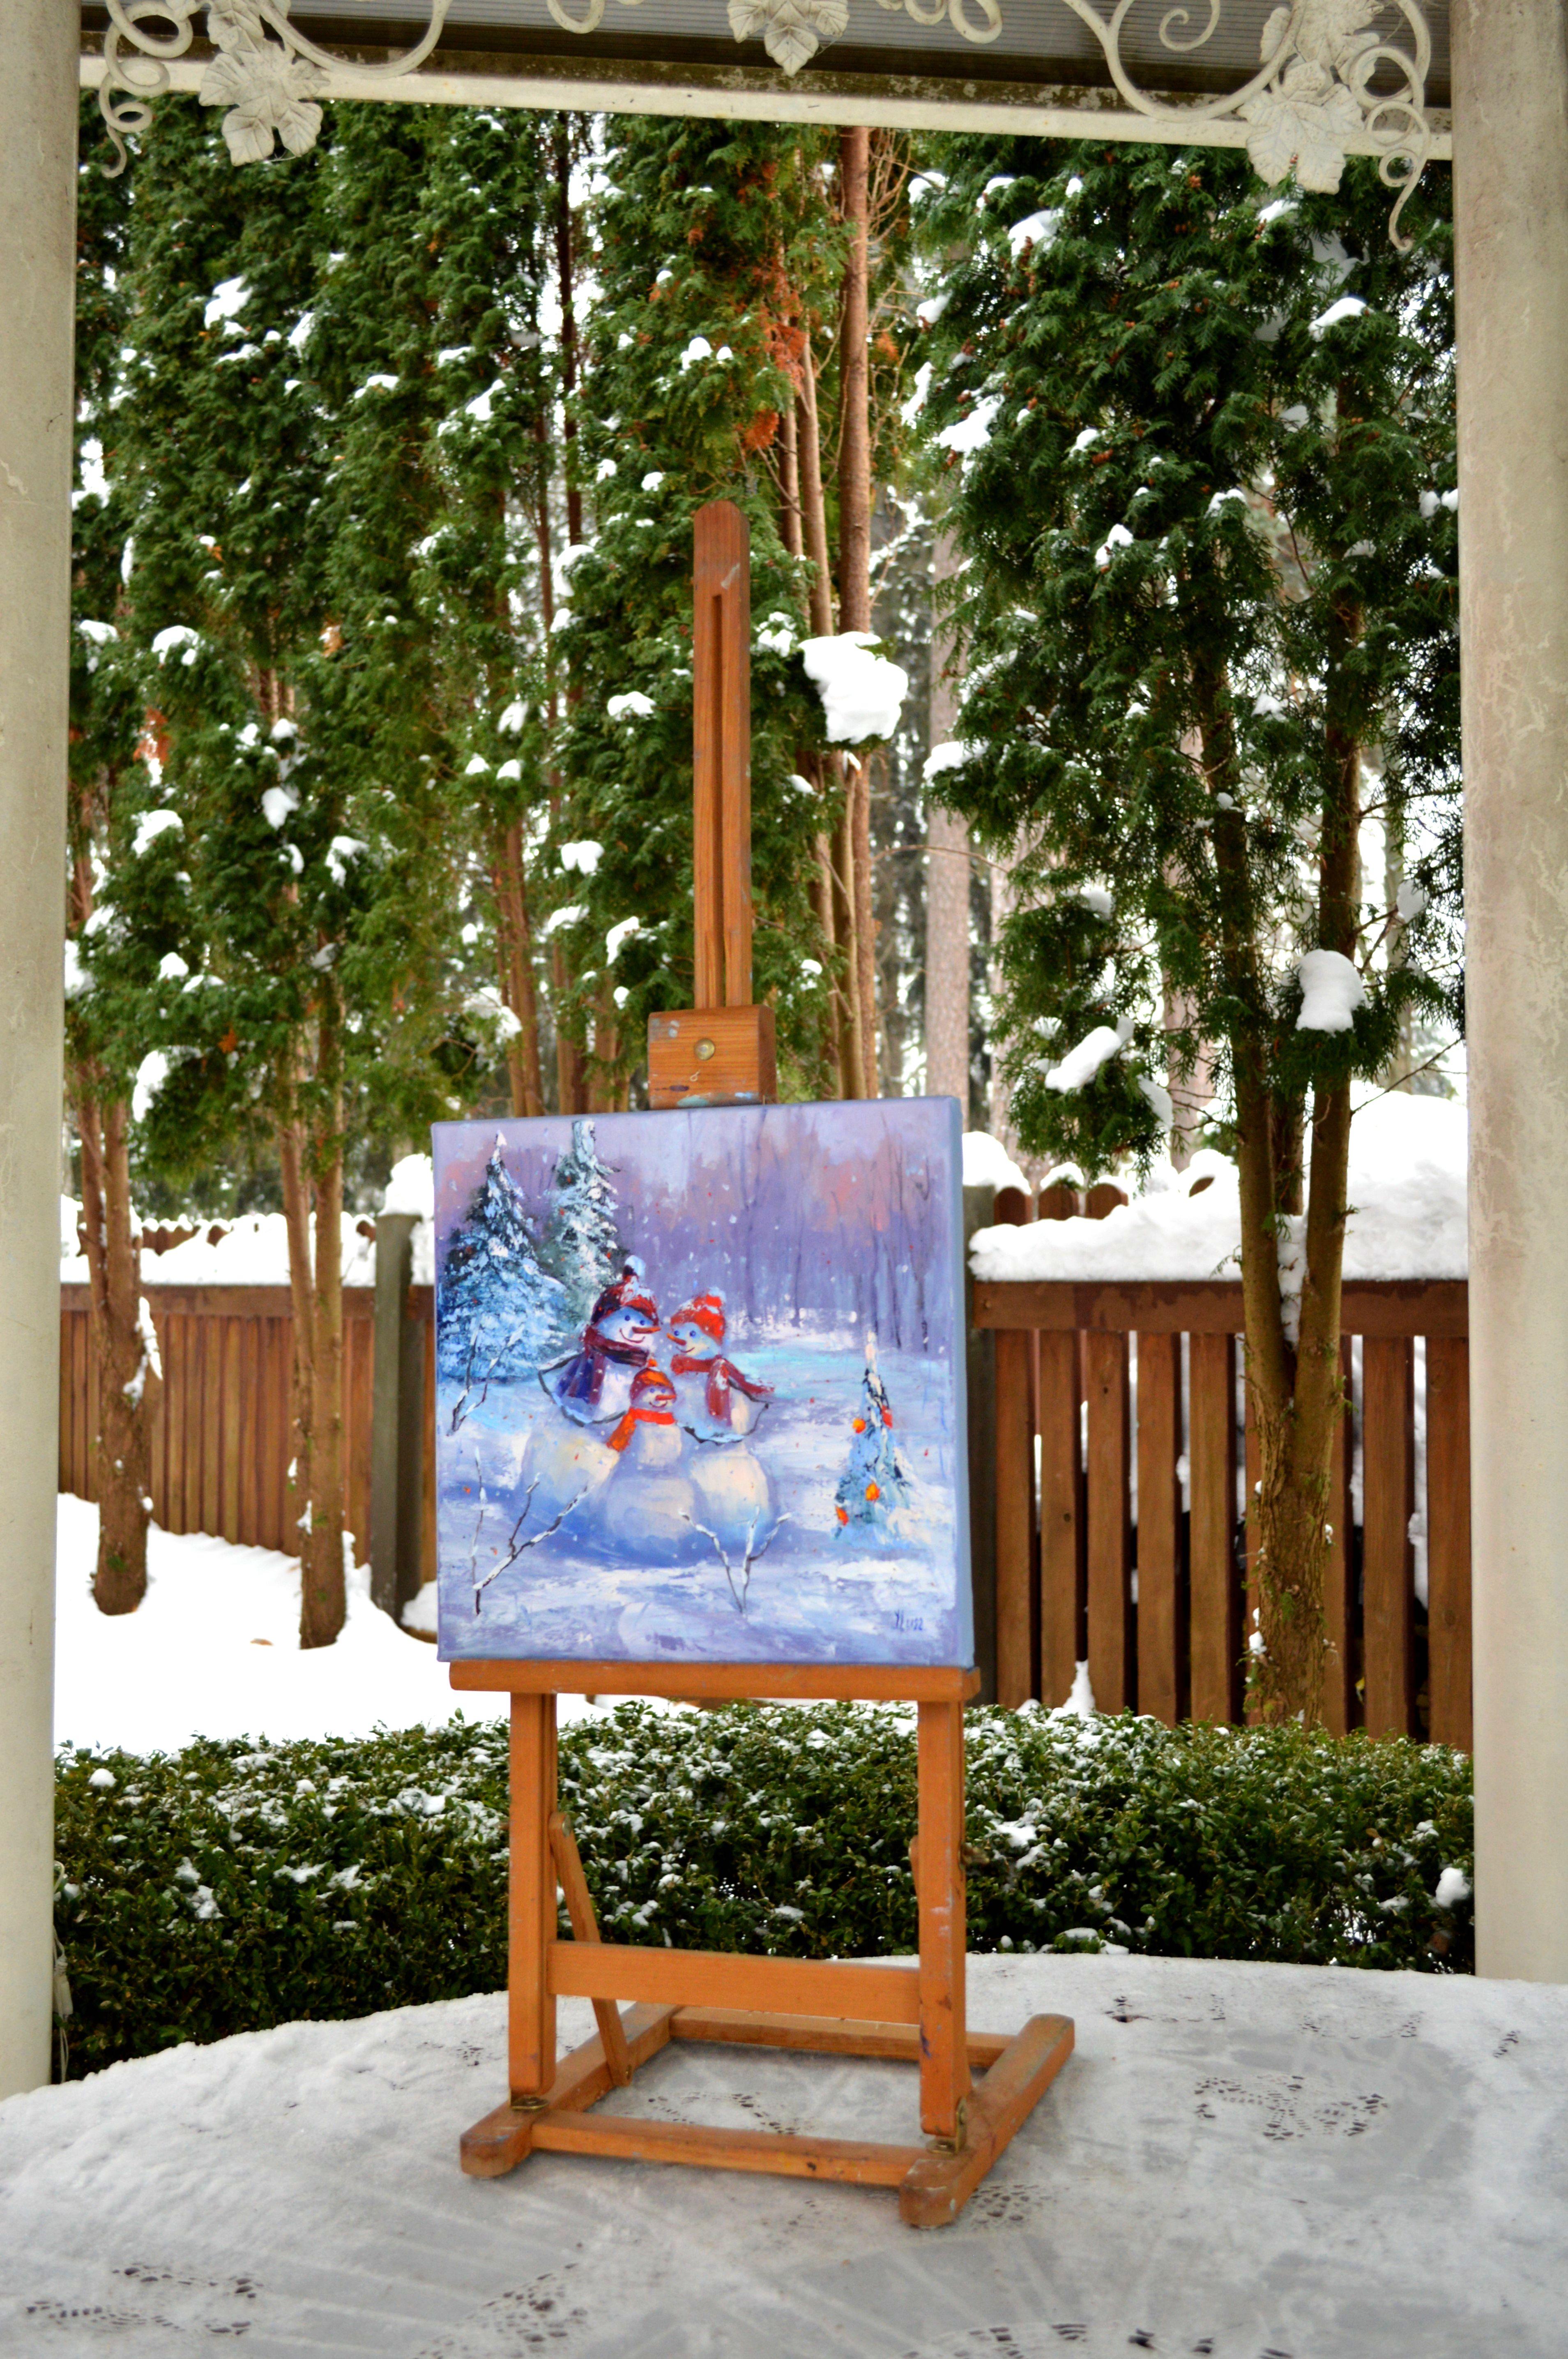 In this oil painting, I've captured the warmth of family ties against the chill of a winter's day. Through impressionistic strokes and an expressionistic palette, I aimed to evoke the joy and tenderness that seasonal traditions can bring. This piece